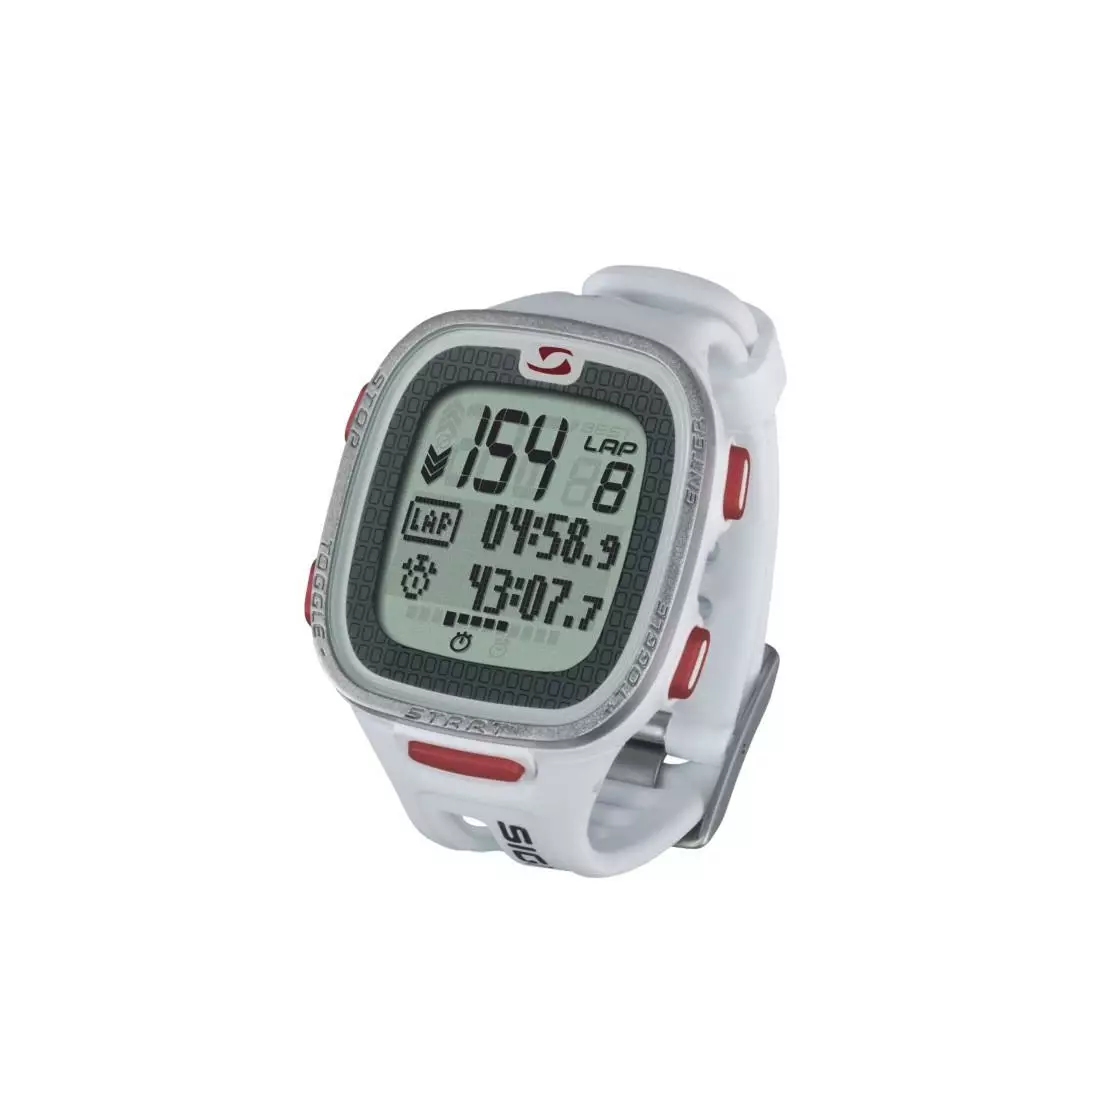 SIGMA heart rate monitor PC 26.14 white